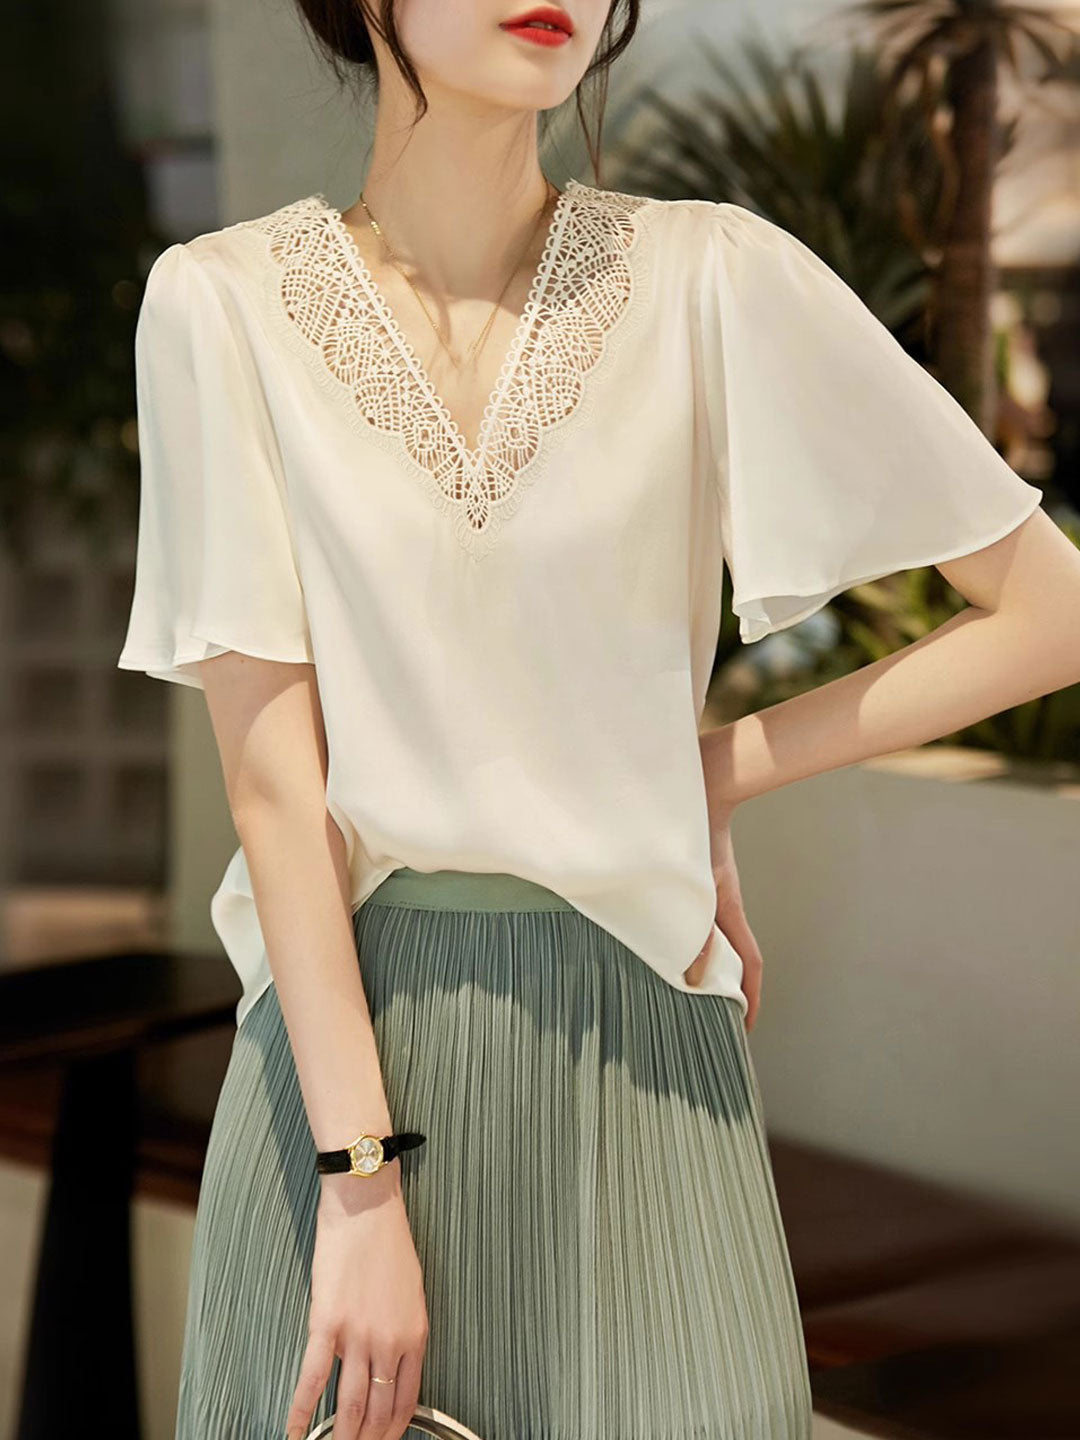 Taylor Elegant V-Neck Hollow Embroidered Chiffon Top